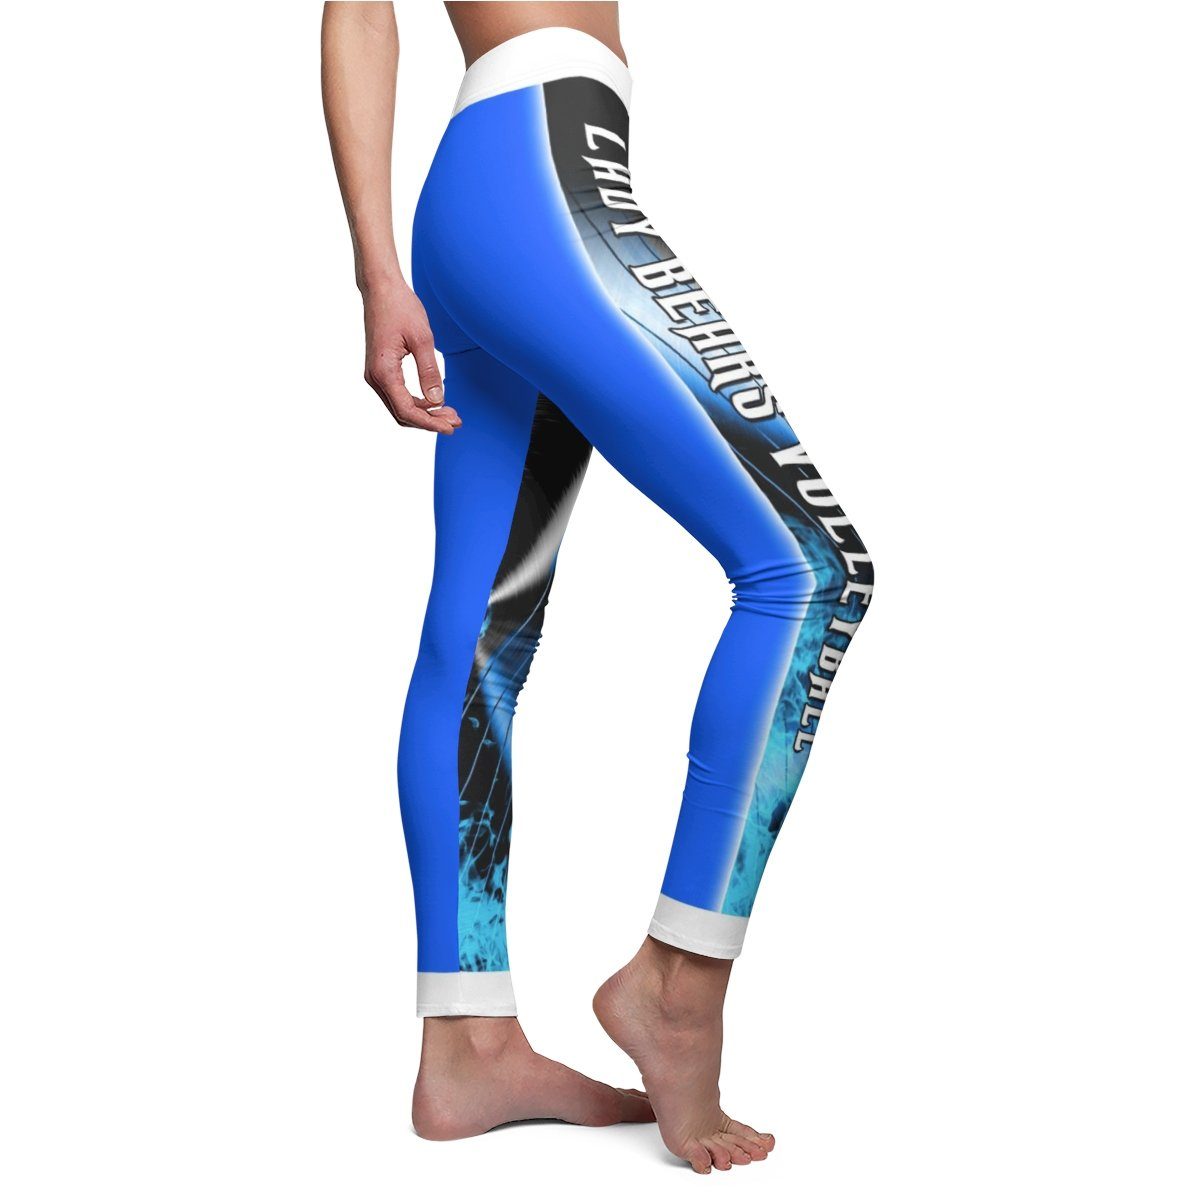 Spin - V.4 - Extreme Sportswear Cut & Sew Leggings Template-Photoshop Template - Photo Solutions